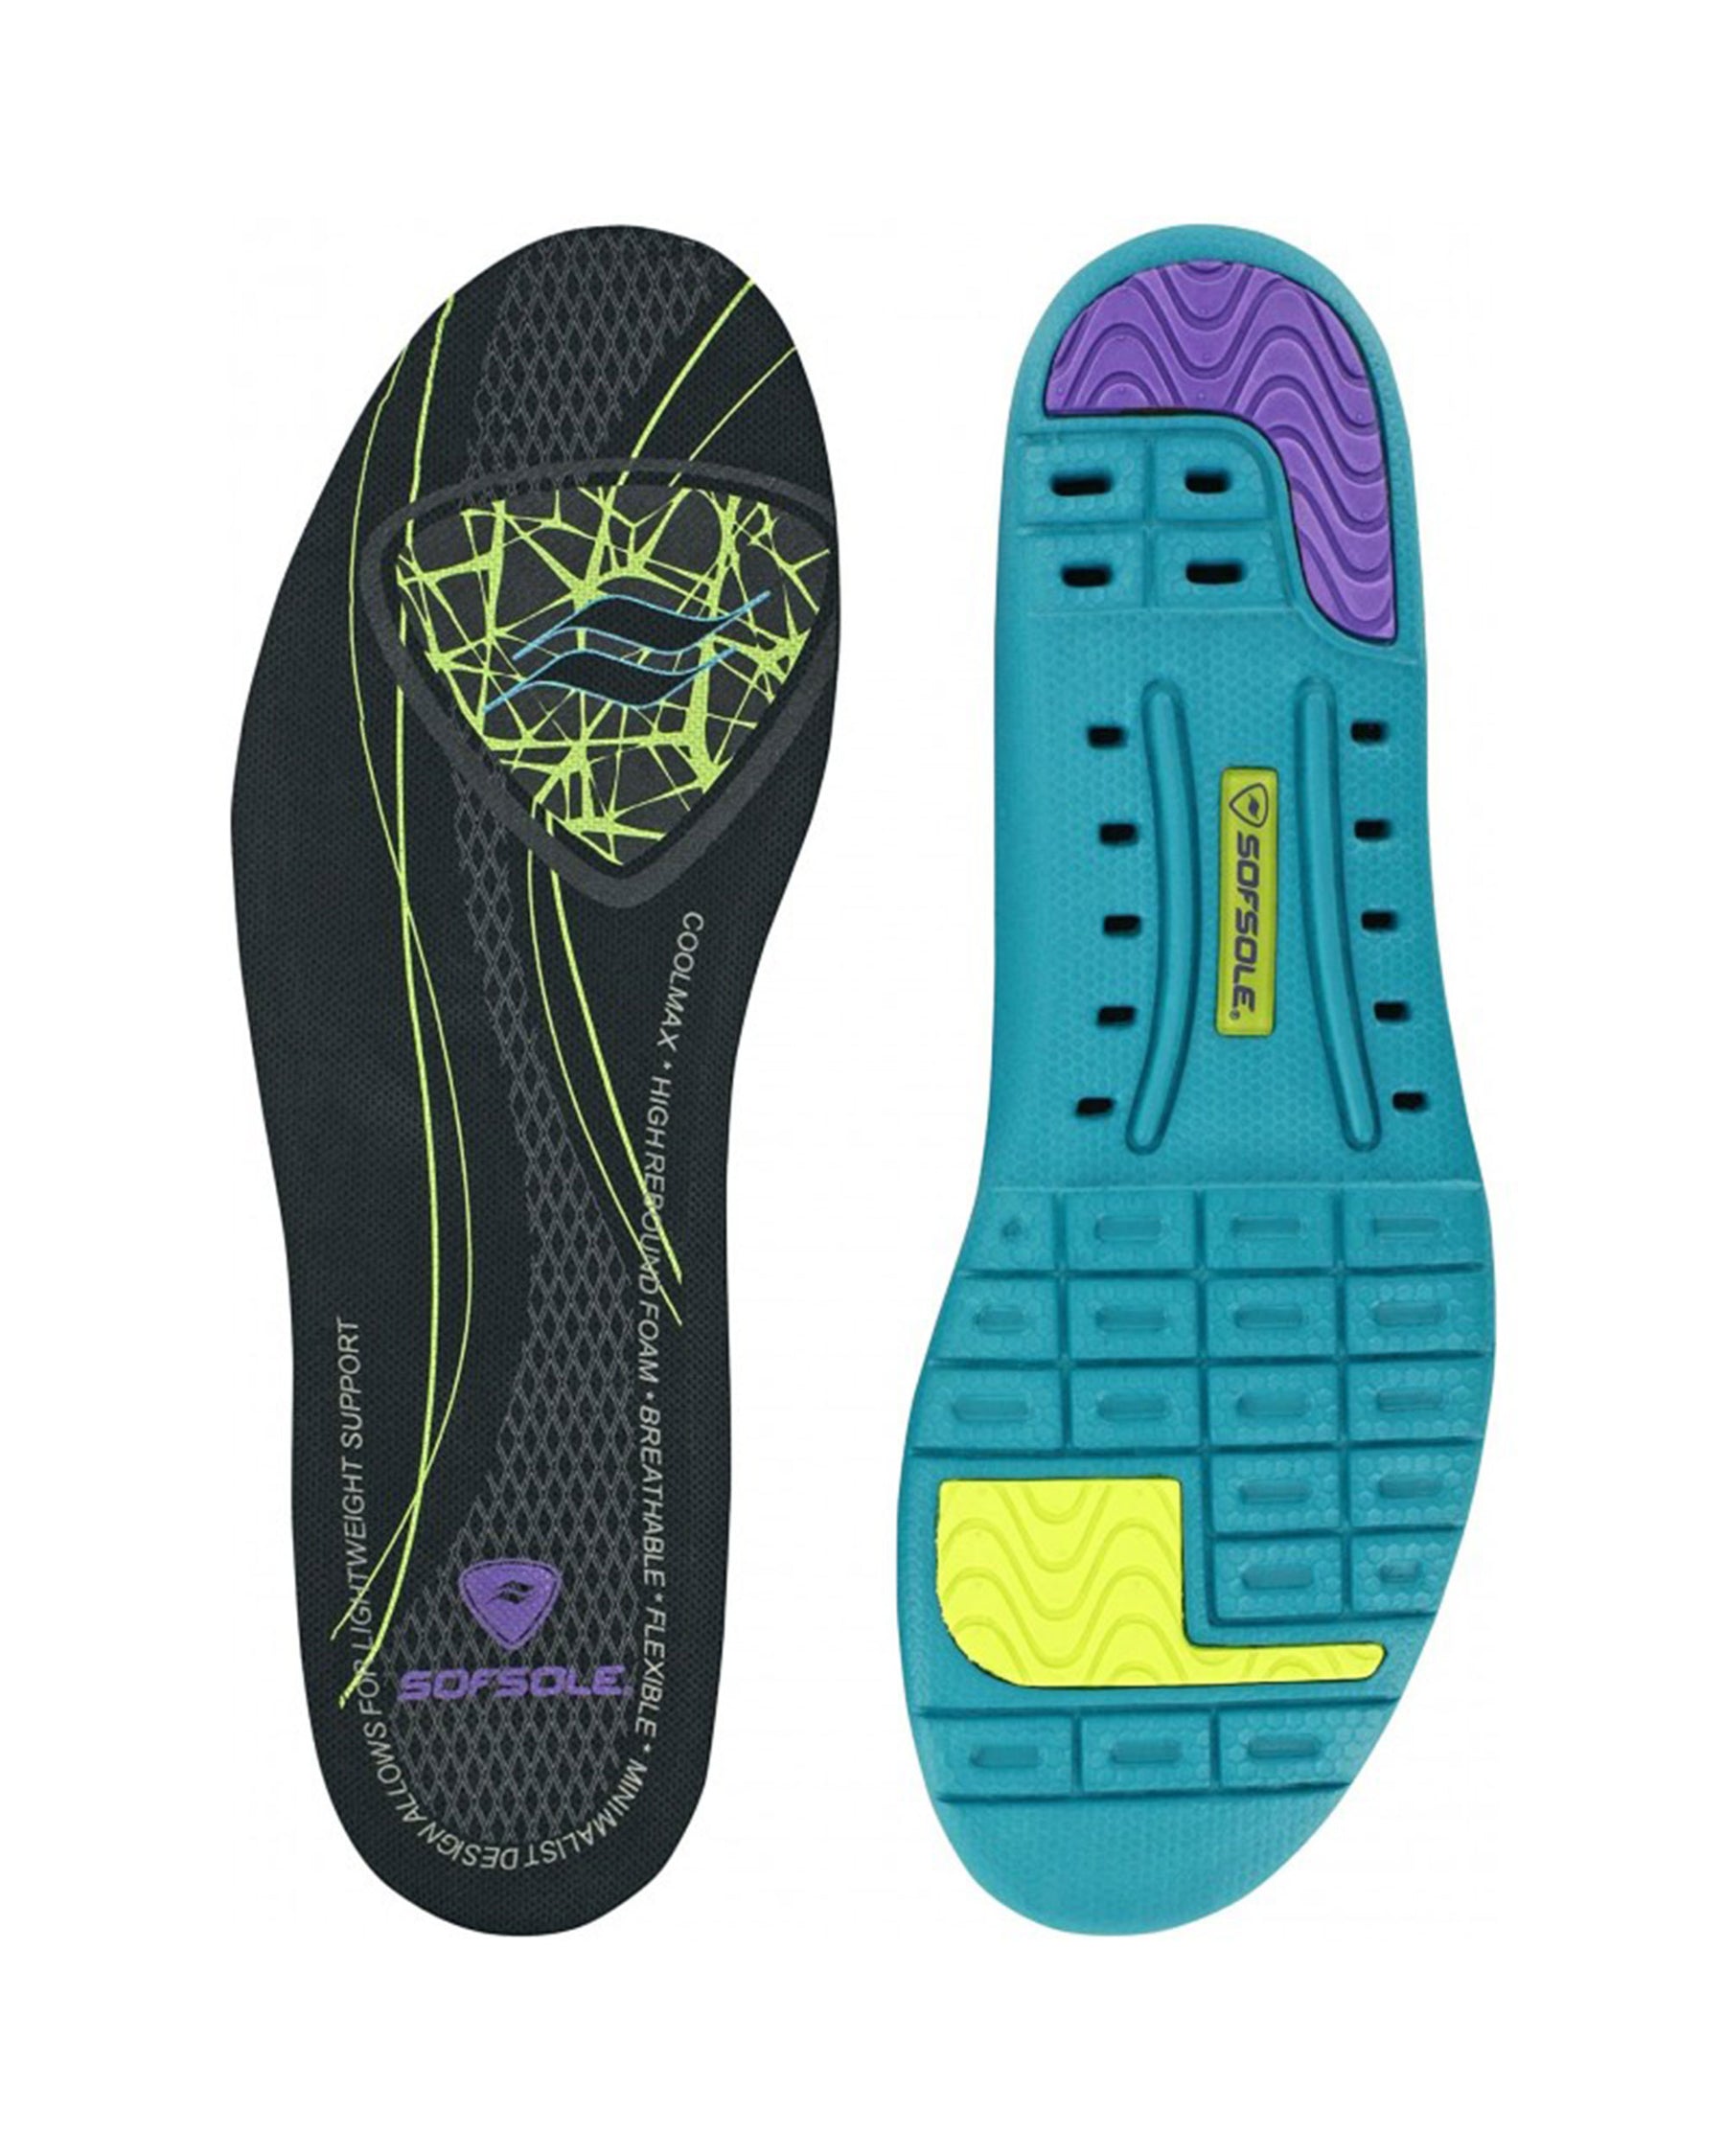 Solette Sofsole Thin Fit Insole